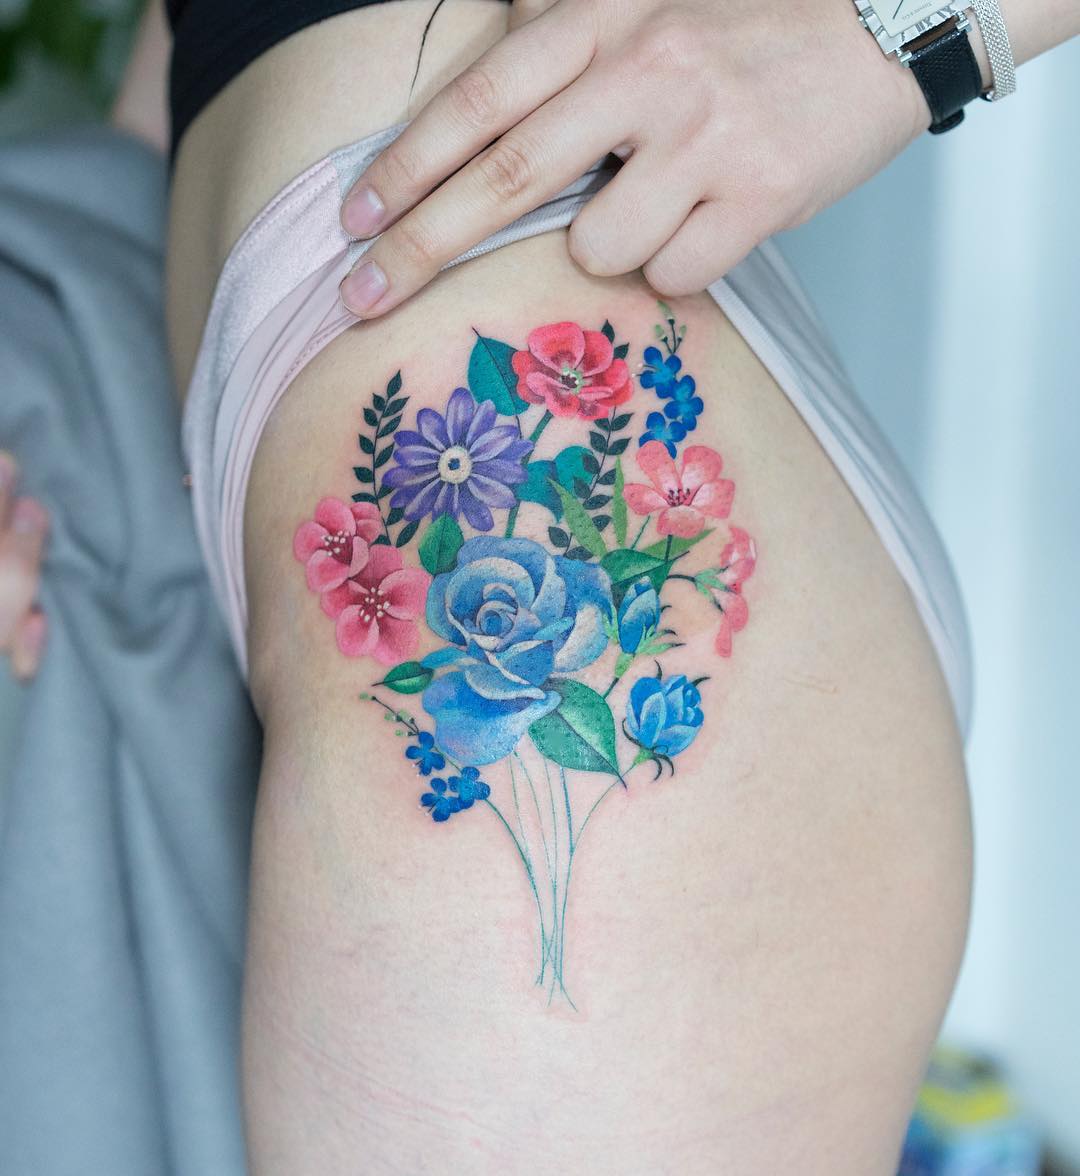 Colorful flower bouquet tattoo on the hip - Tattoogrid.net.